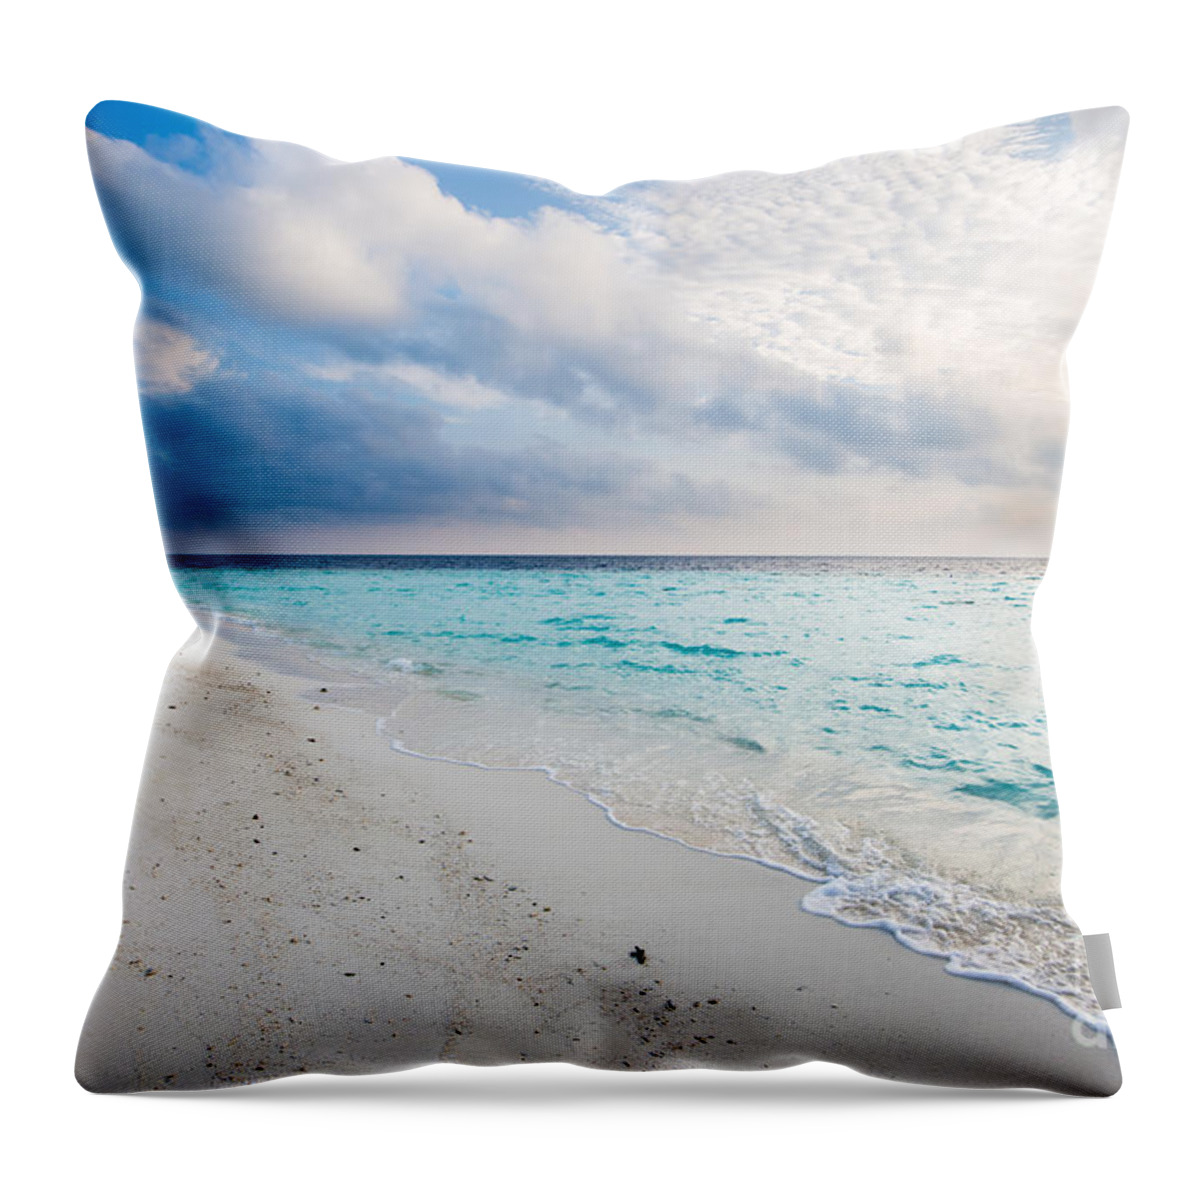 Bahamas Throw Pillow featuring the photograph Colors Of Paradise by Hannes Cmarits